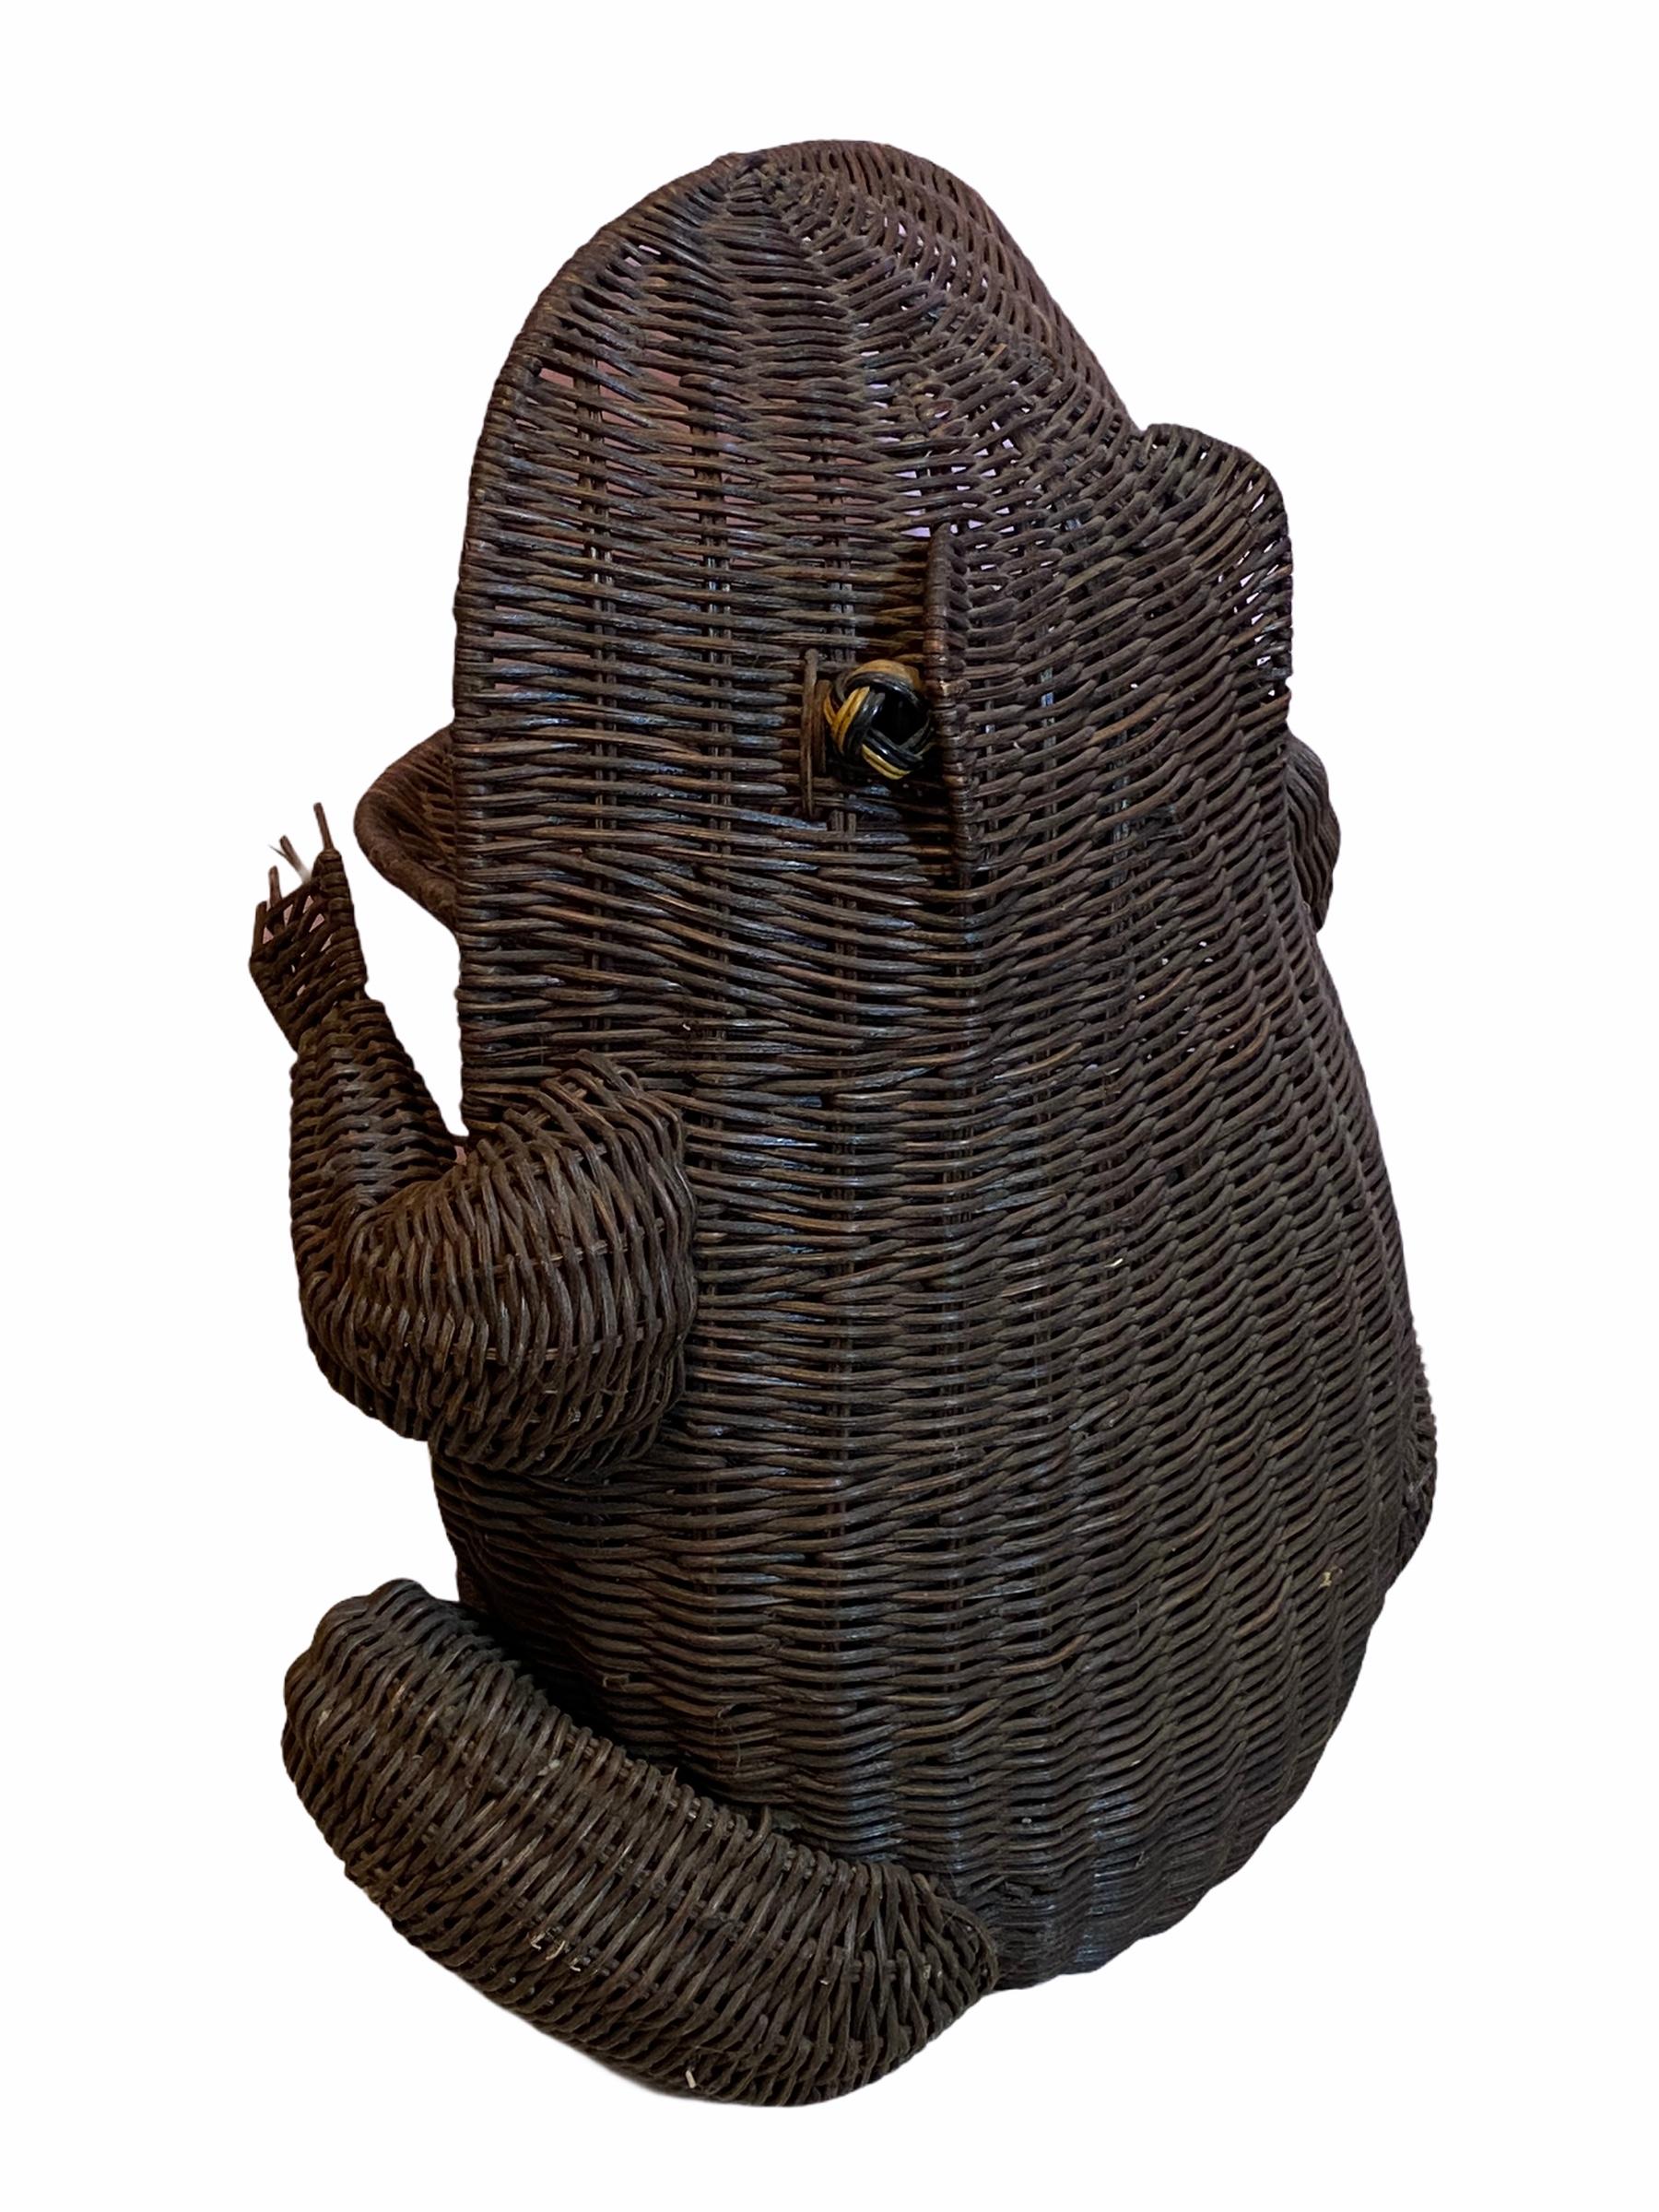 Hand-Crafted Mid-Century Modern Frog Wicker Magazine Rack Stand, 1970s, German For Sale